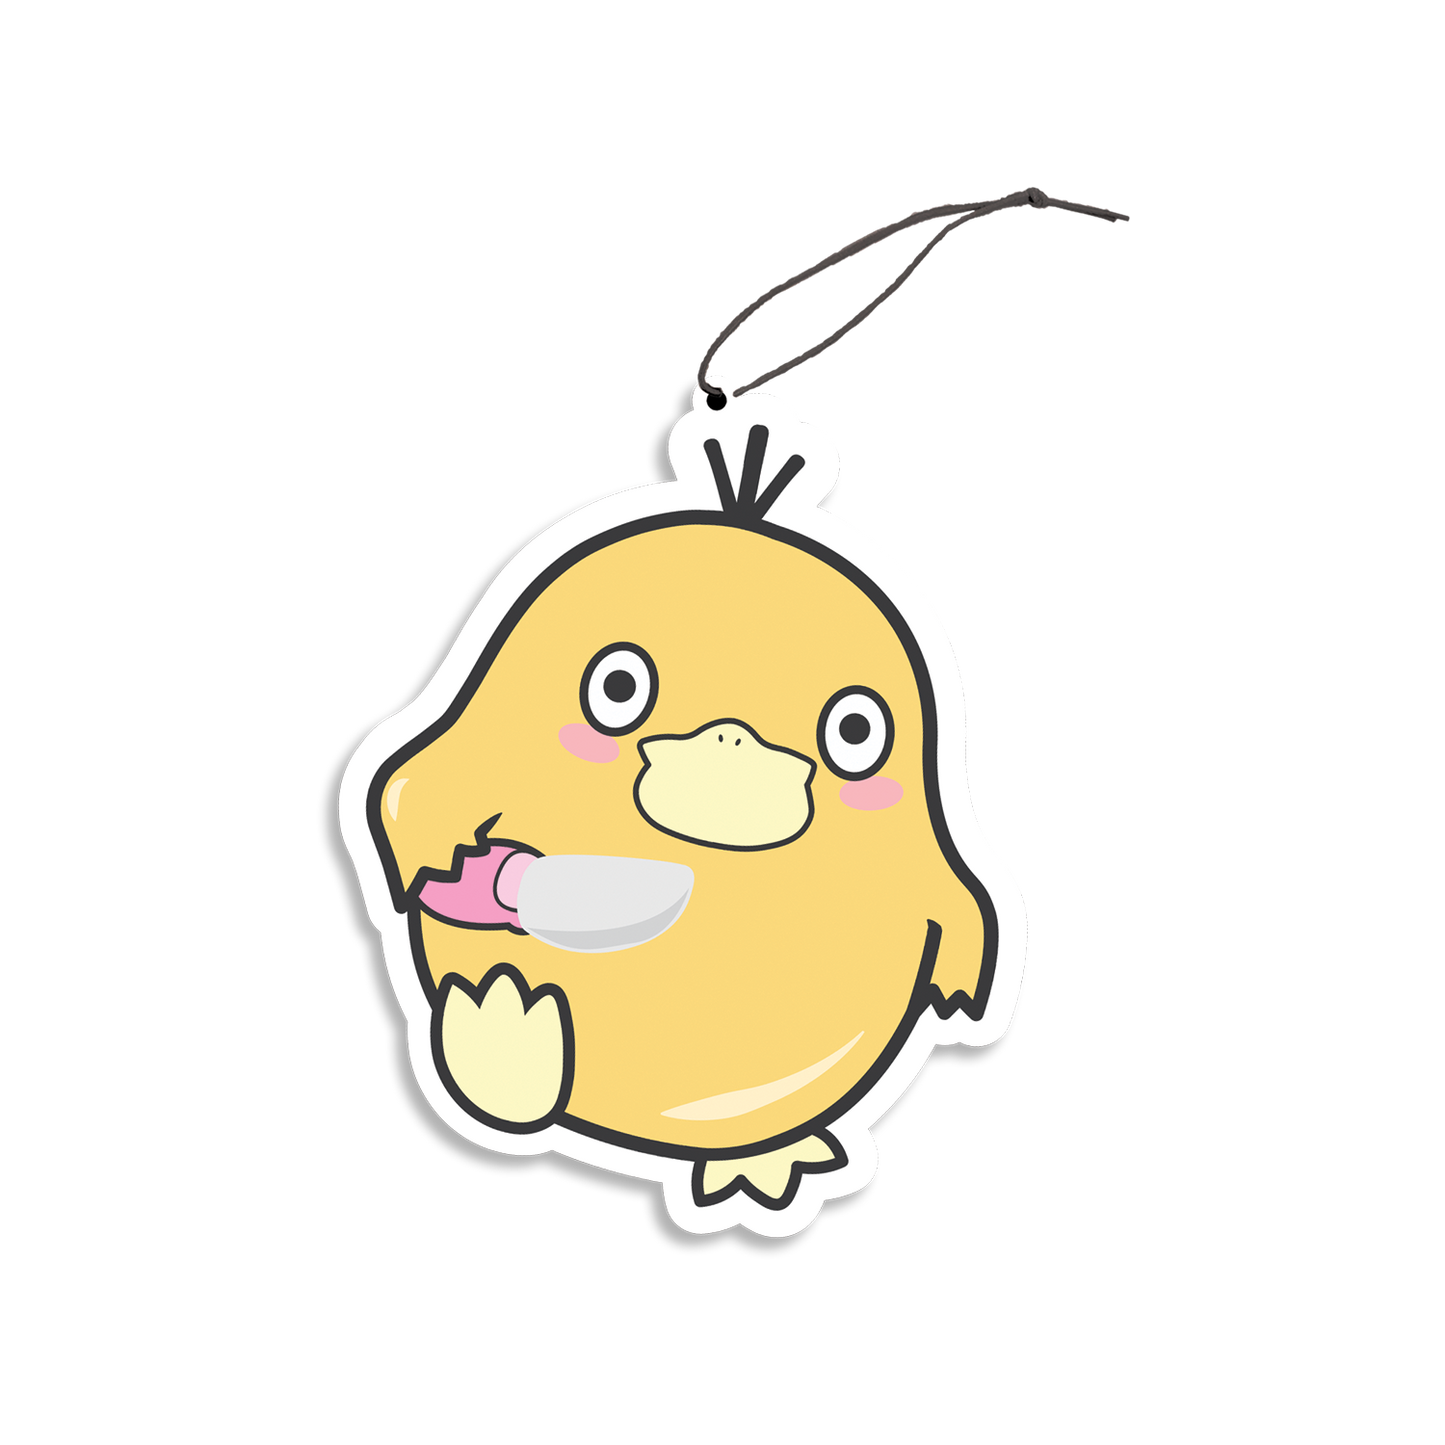 Psyduck with Knife Air Freshener design includes Pokemon Psyduck holding a knife.